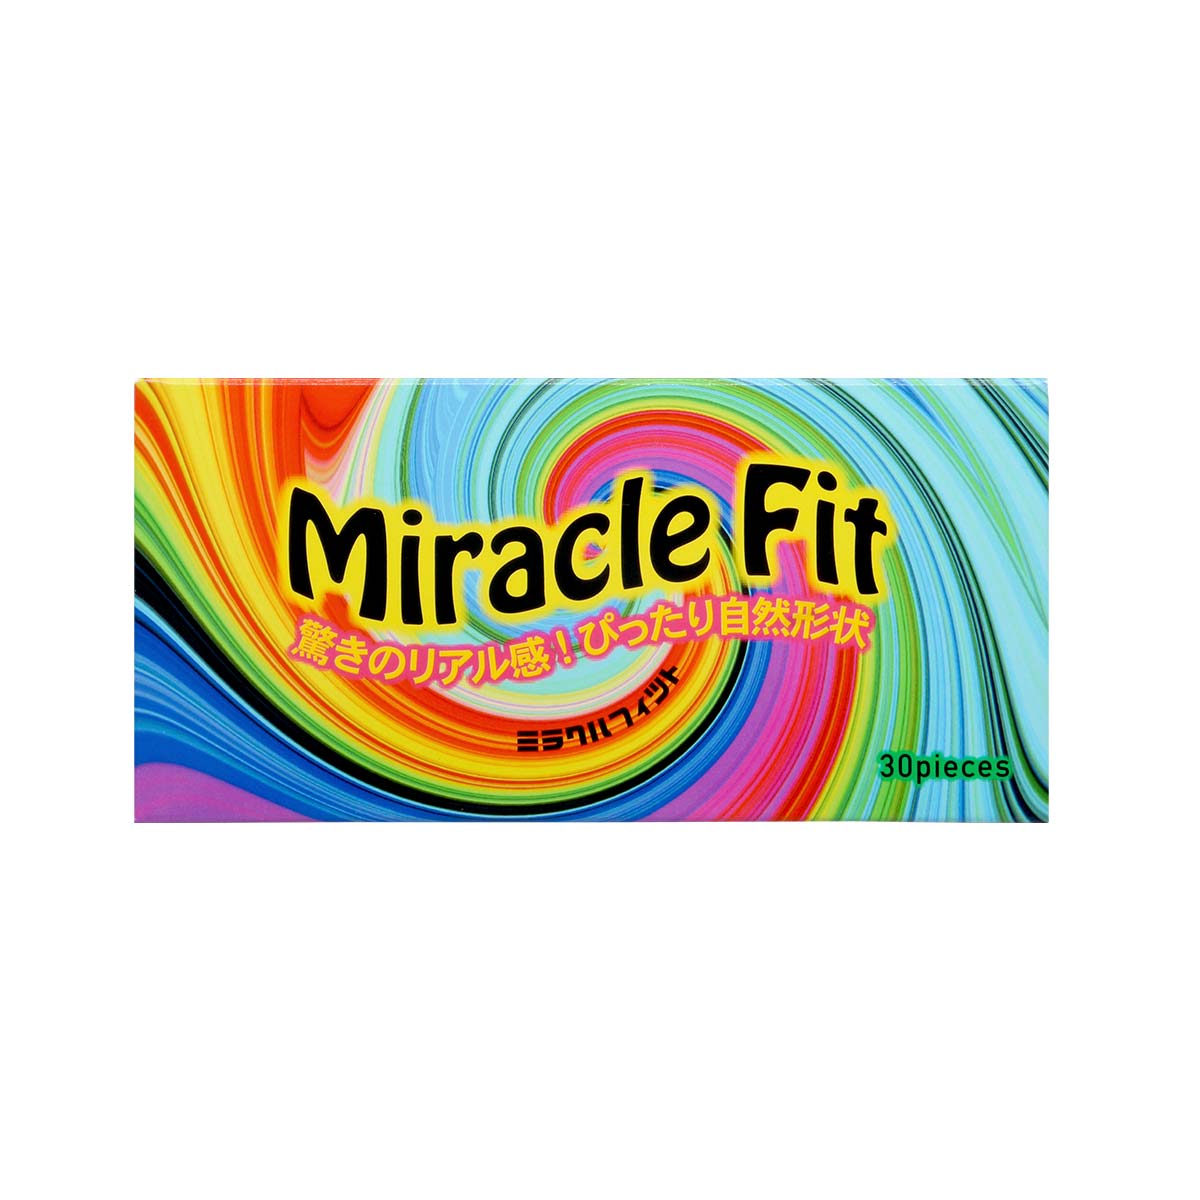 Sagami Miracle Fit 51mm 30's Pack Latex Condom-p_2